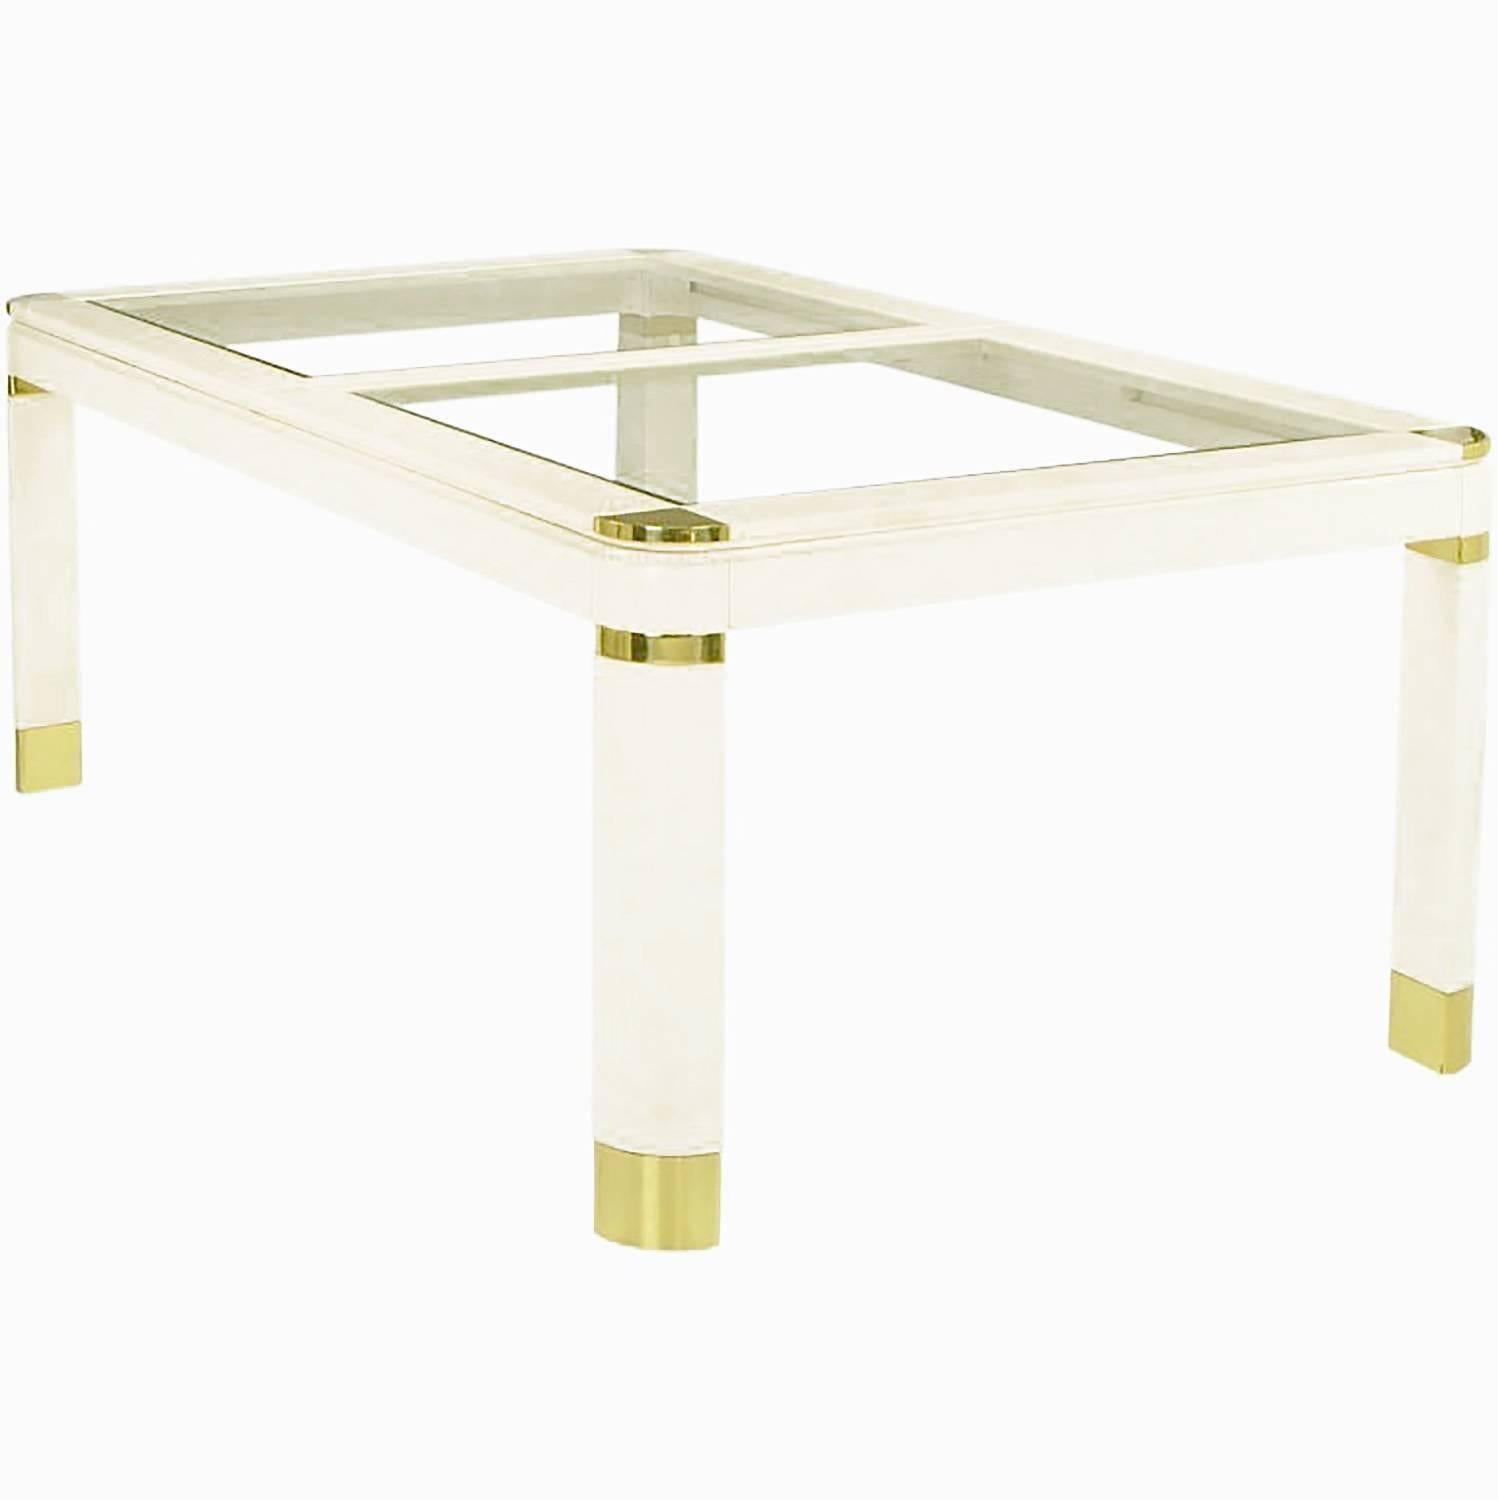 Superb dining table in ivory lacquer over wood, with two one-half inch thick beveled glass inserts. Accented by brass sabots, banding, and corners. With two solid wood ivory lacquered 20